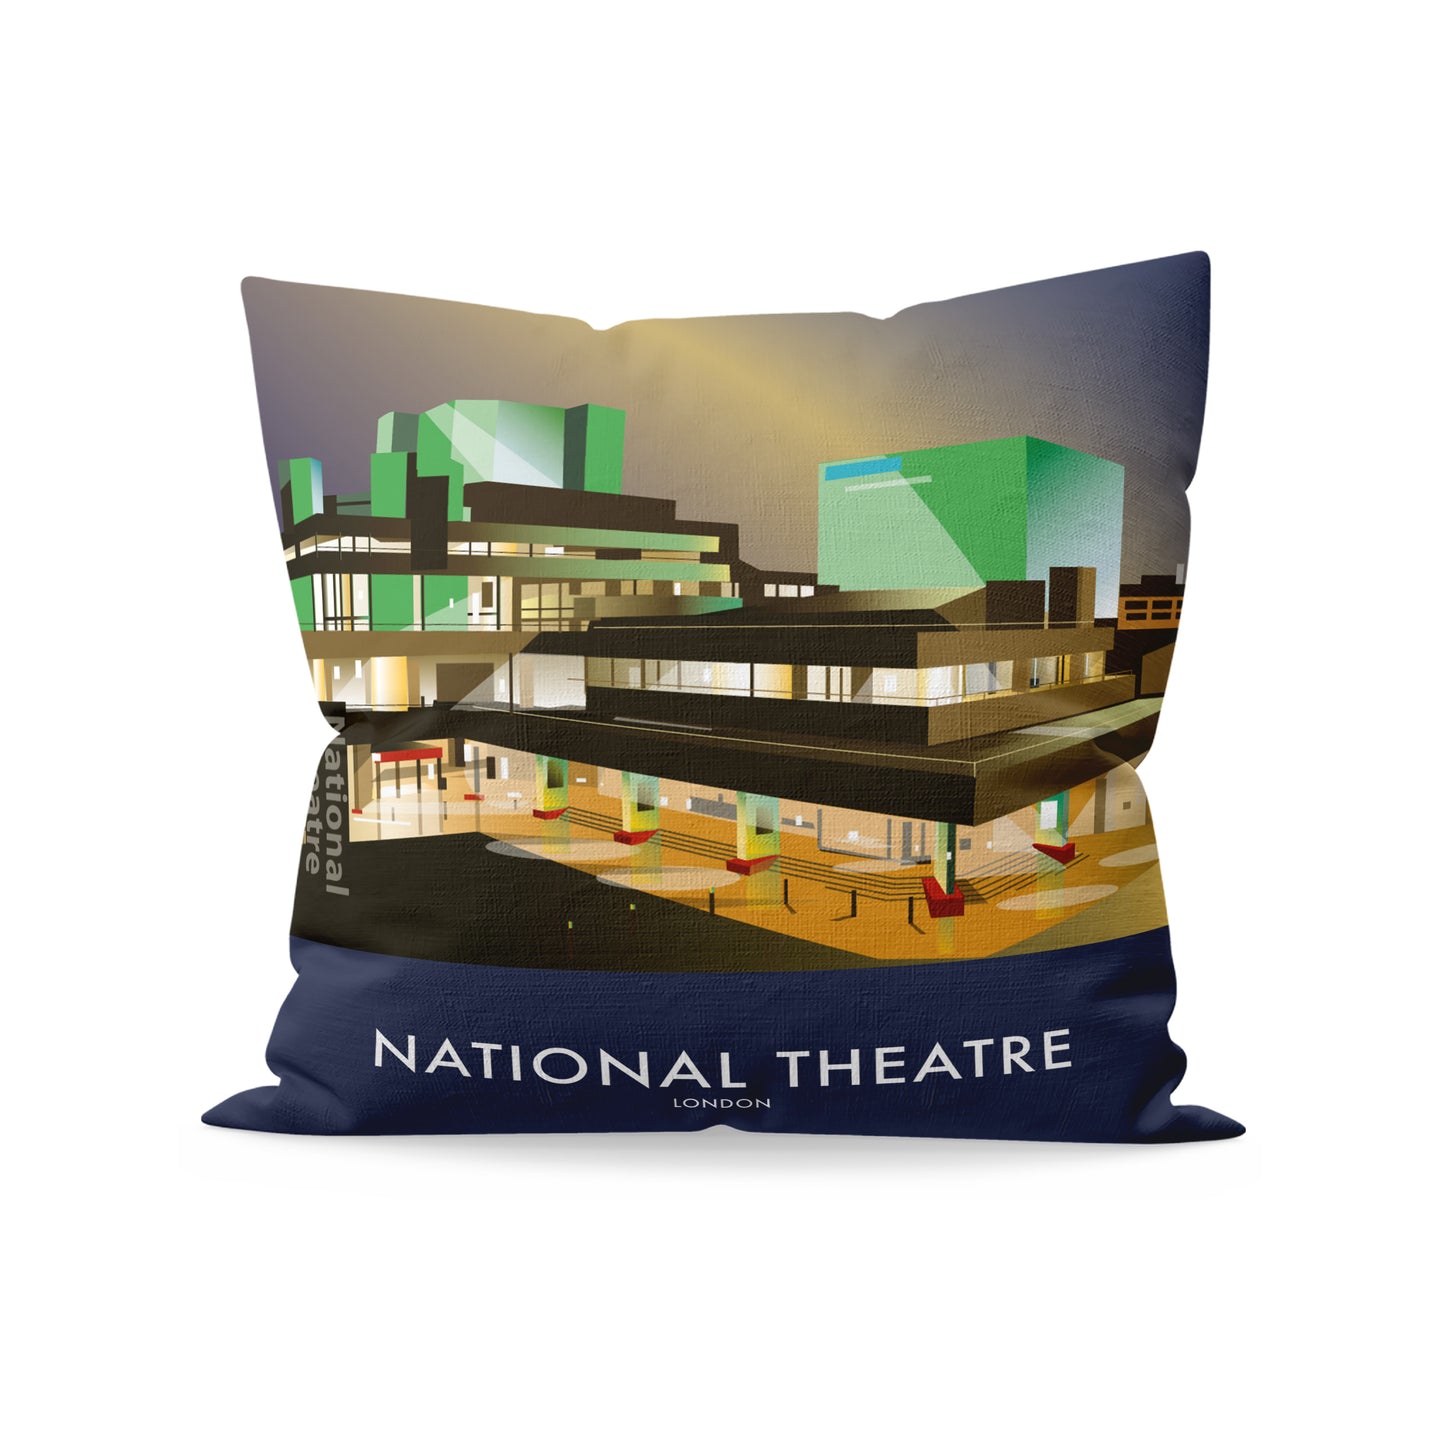 The National Theatre Cushion